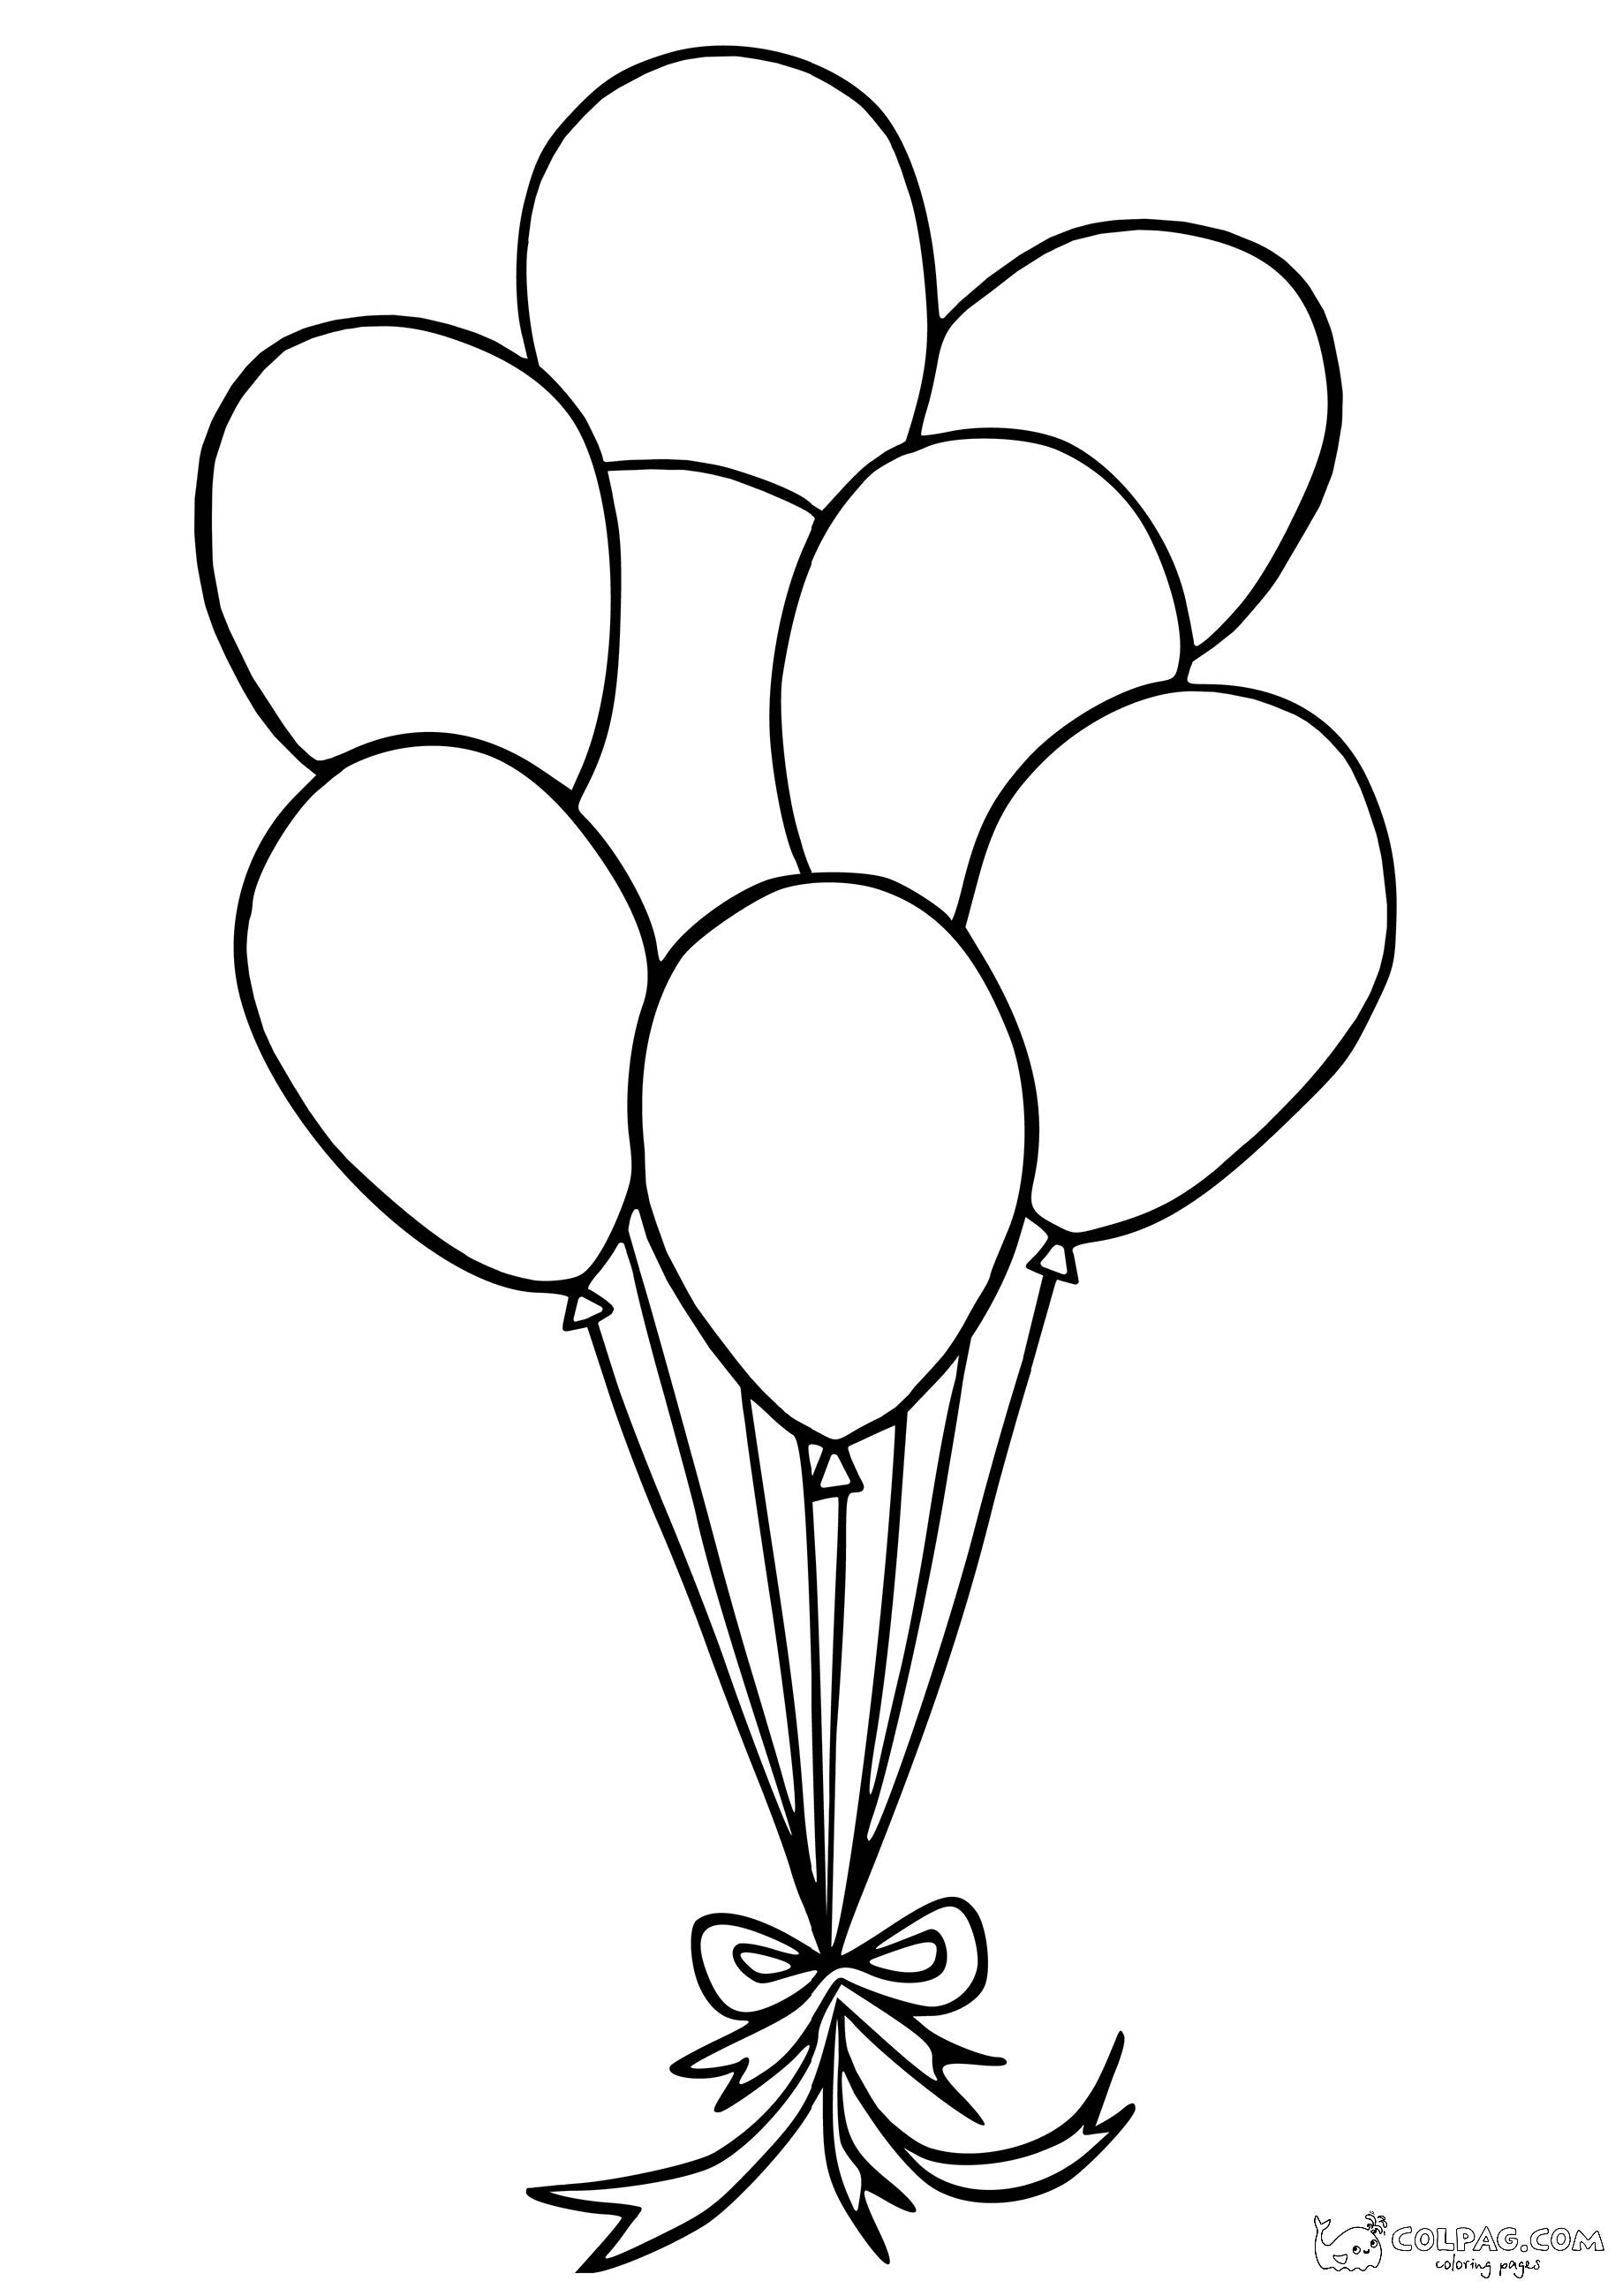 12-cute-baloons-drawing-coloring-page-colpag-12